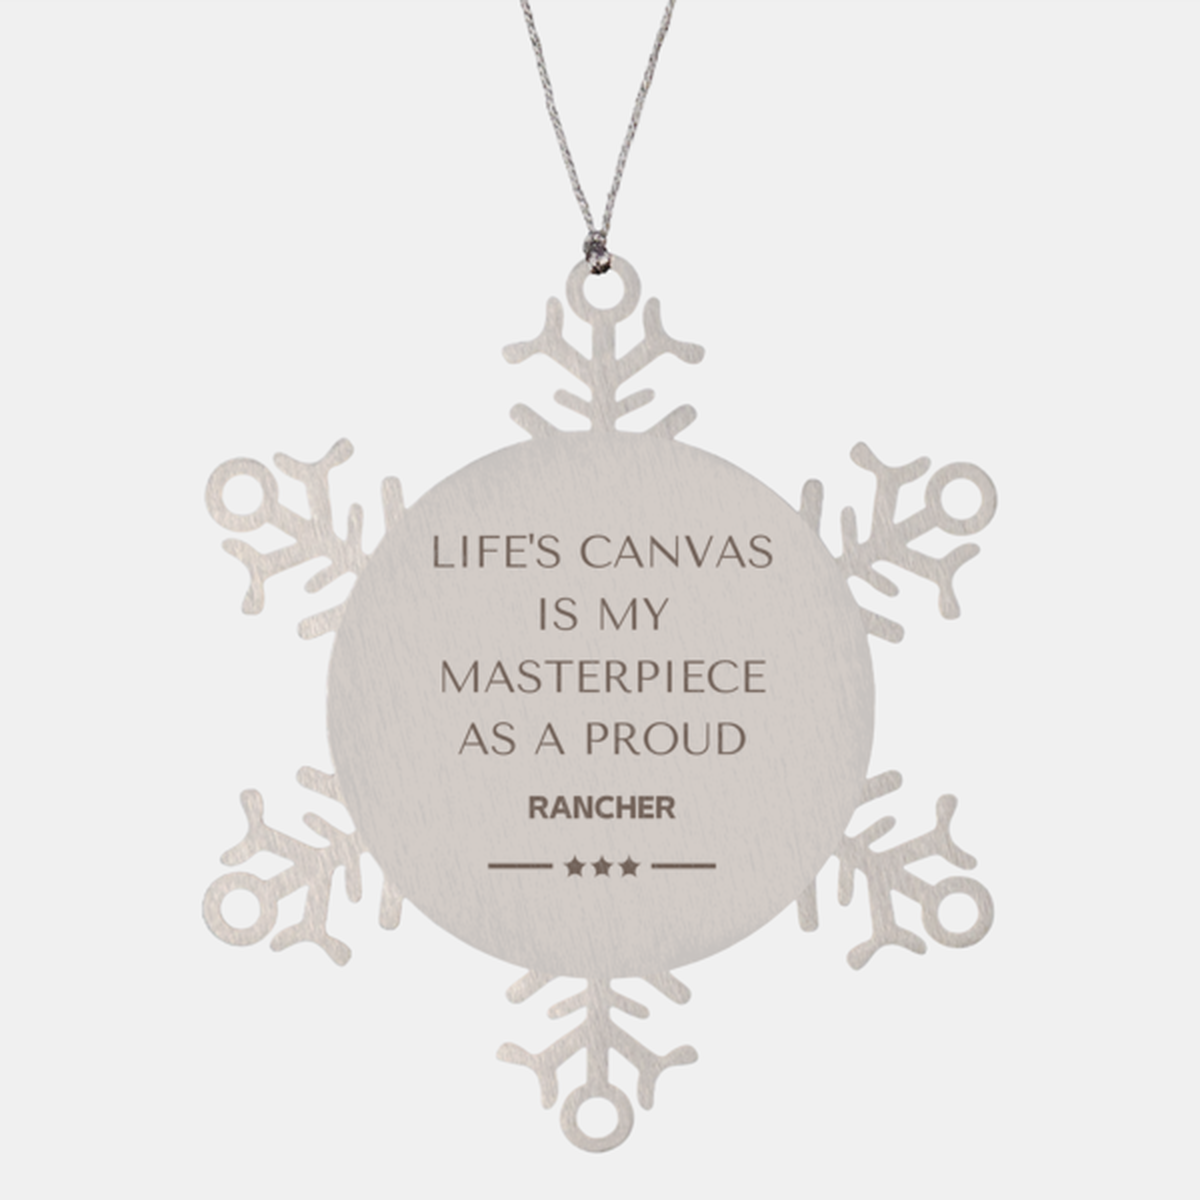 Proud Rancher Gifts, Life's canvas is my masterpiece, Epic Birthday Christmas Unique Snowflake Ornament For Rancher, Coworkers, Men, Women, Friends